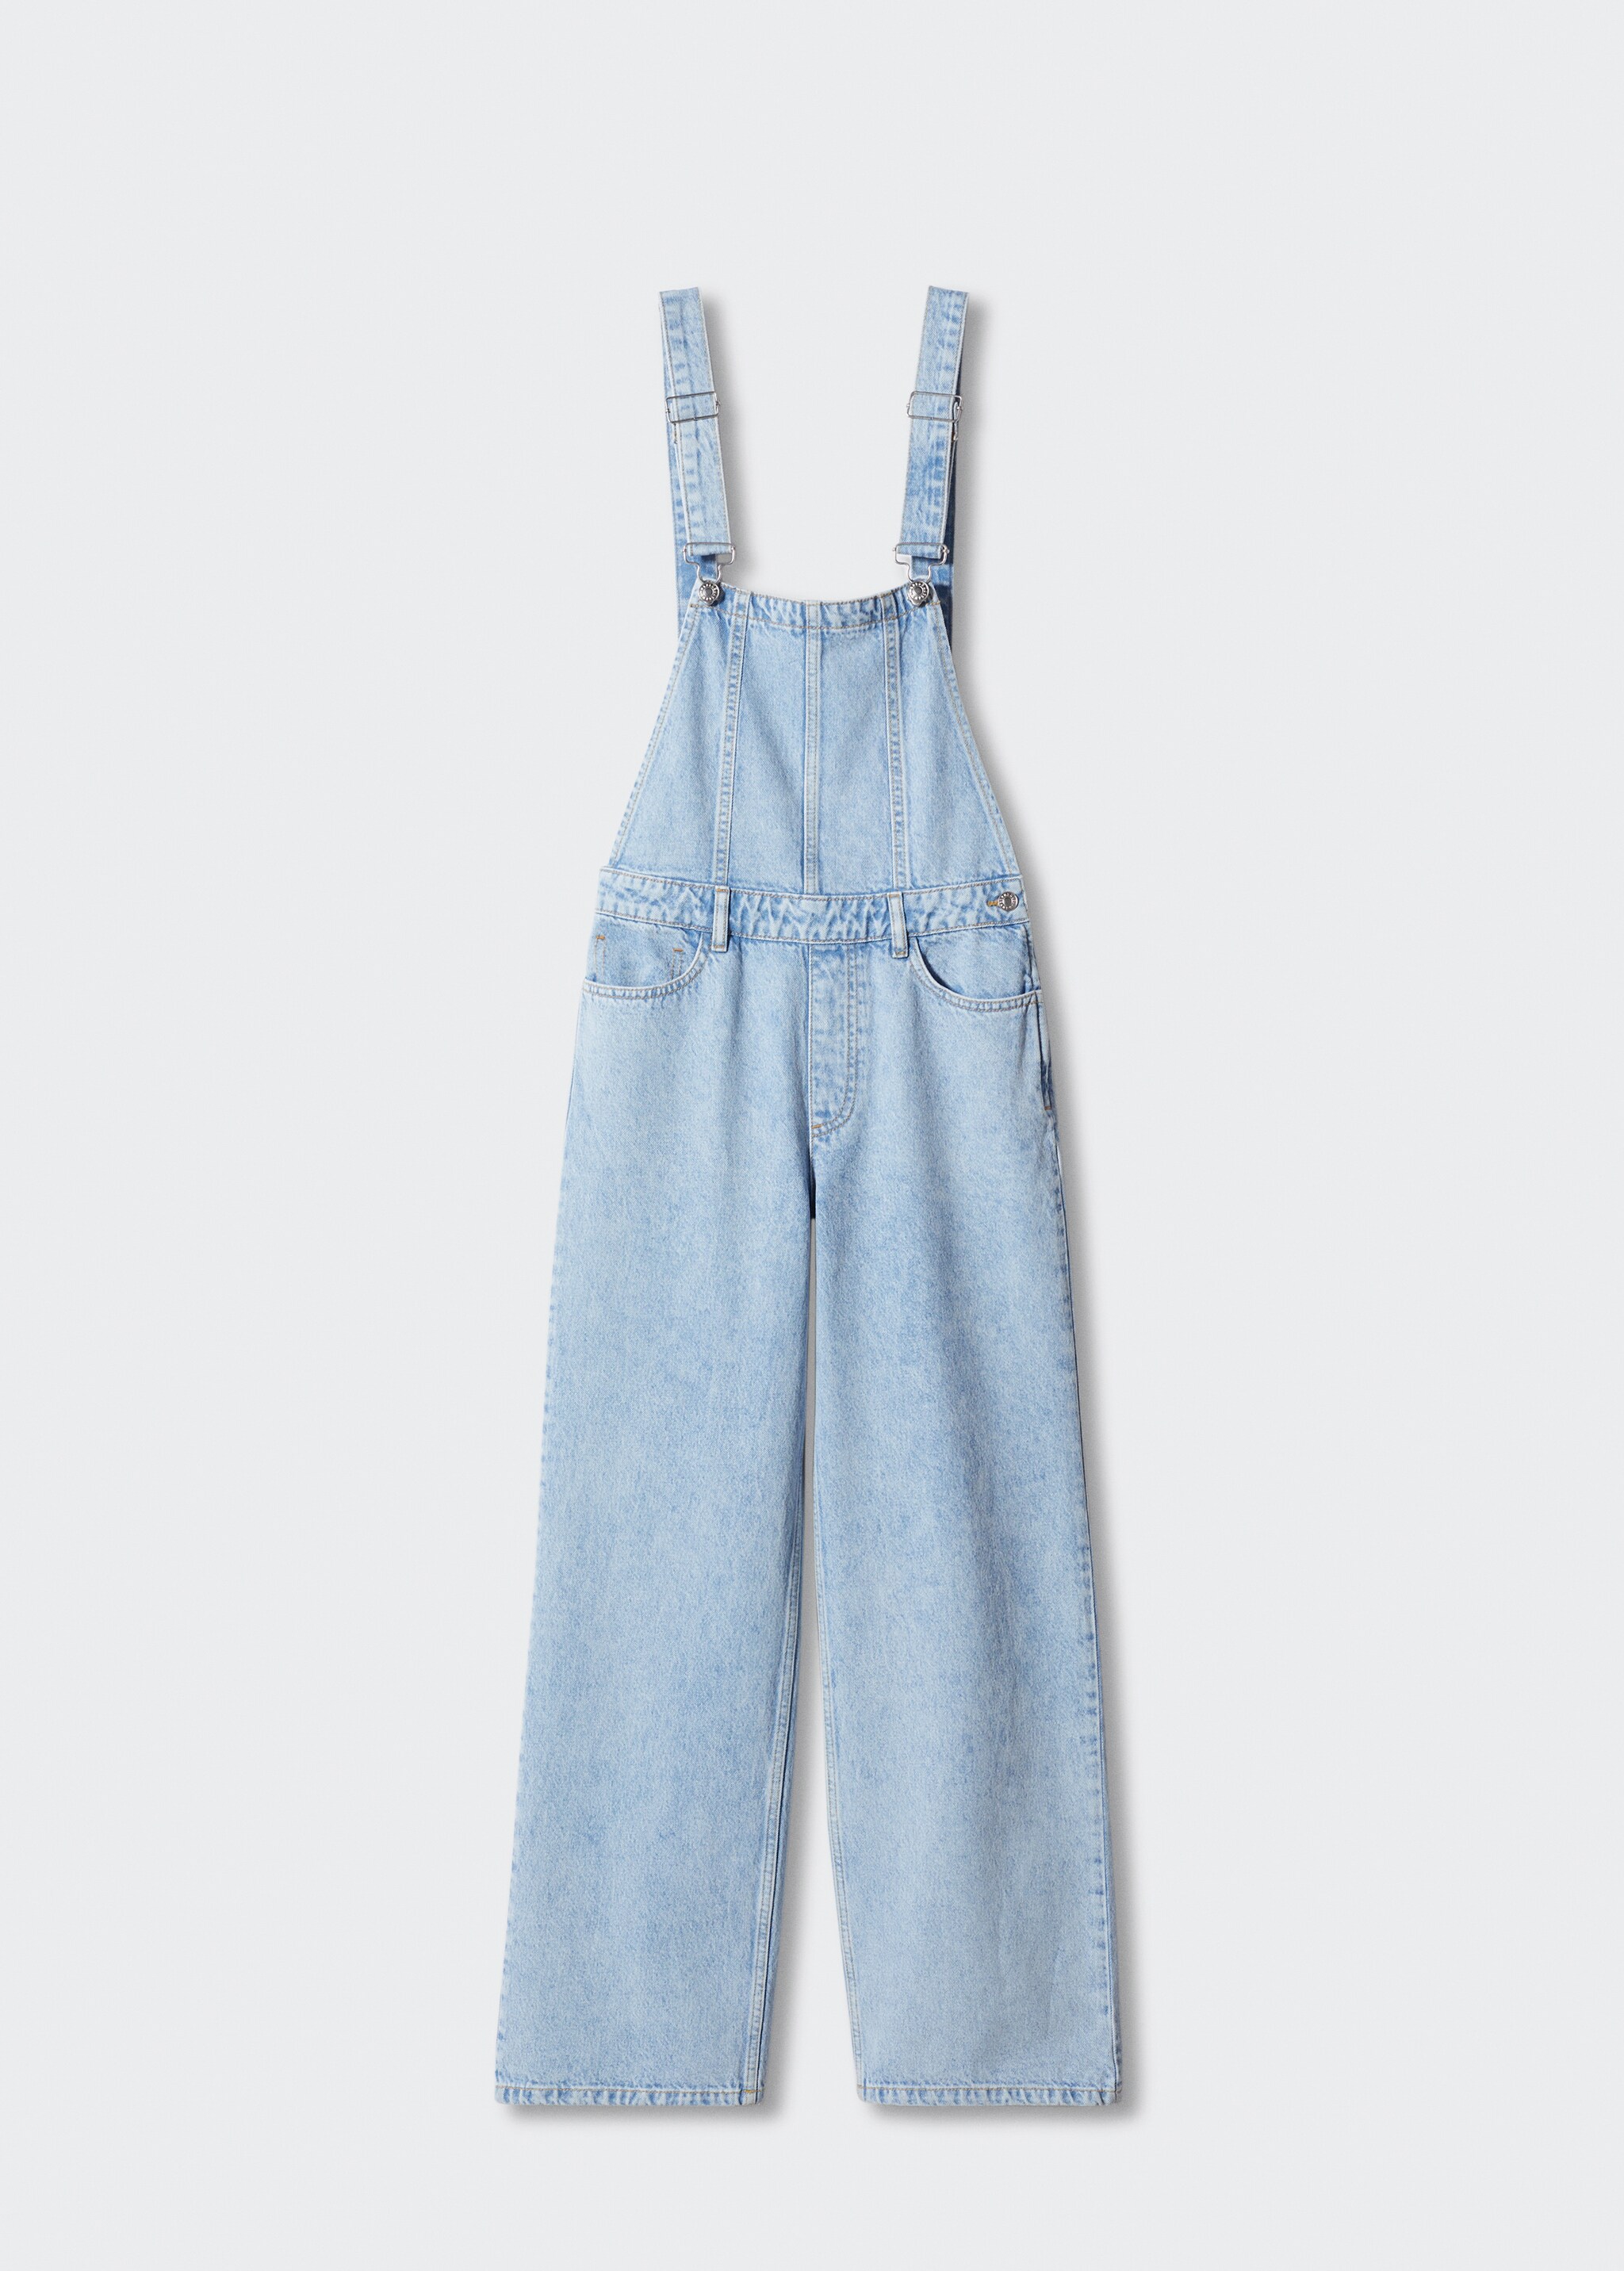 Lined denim dungarees - Article without model